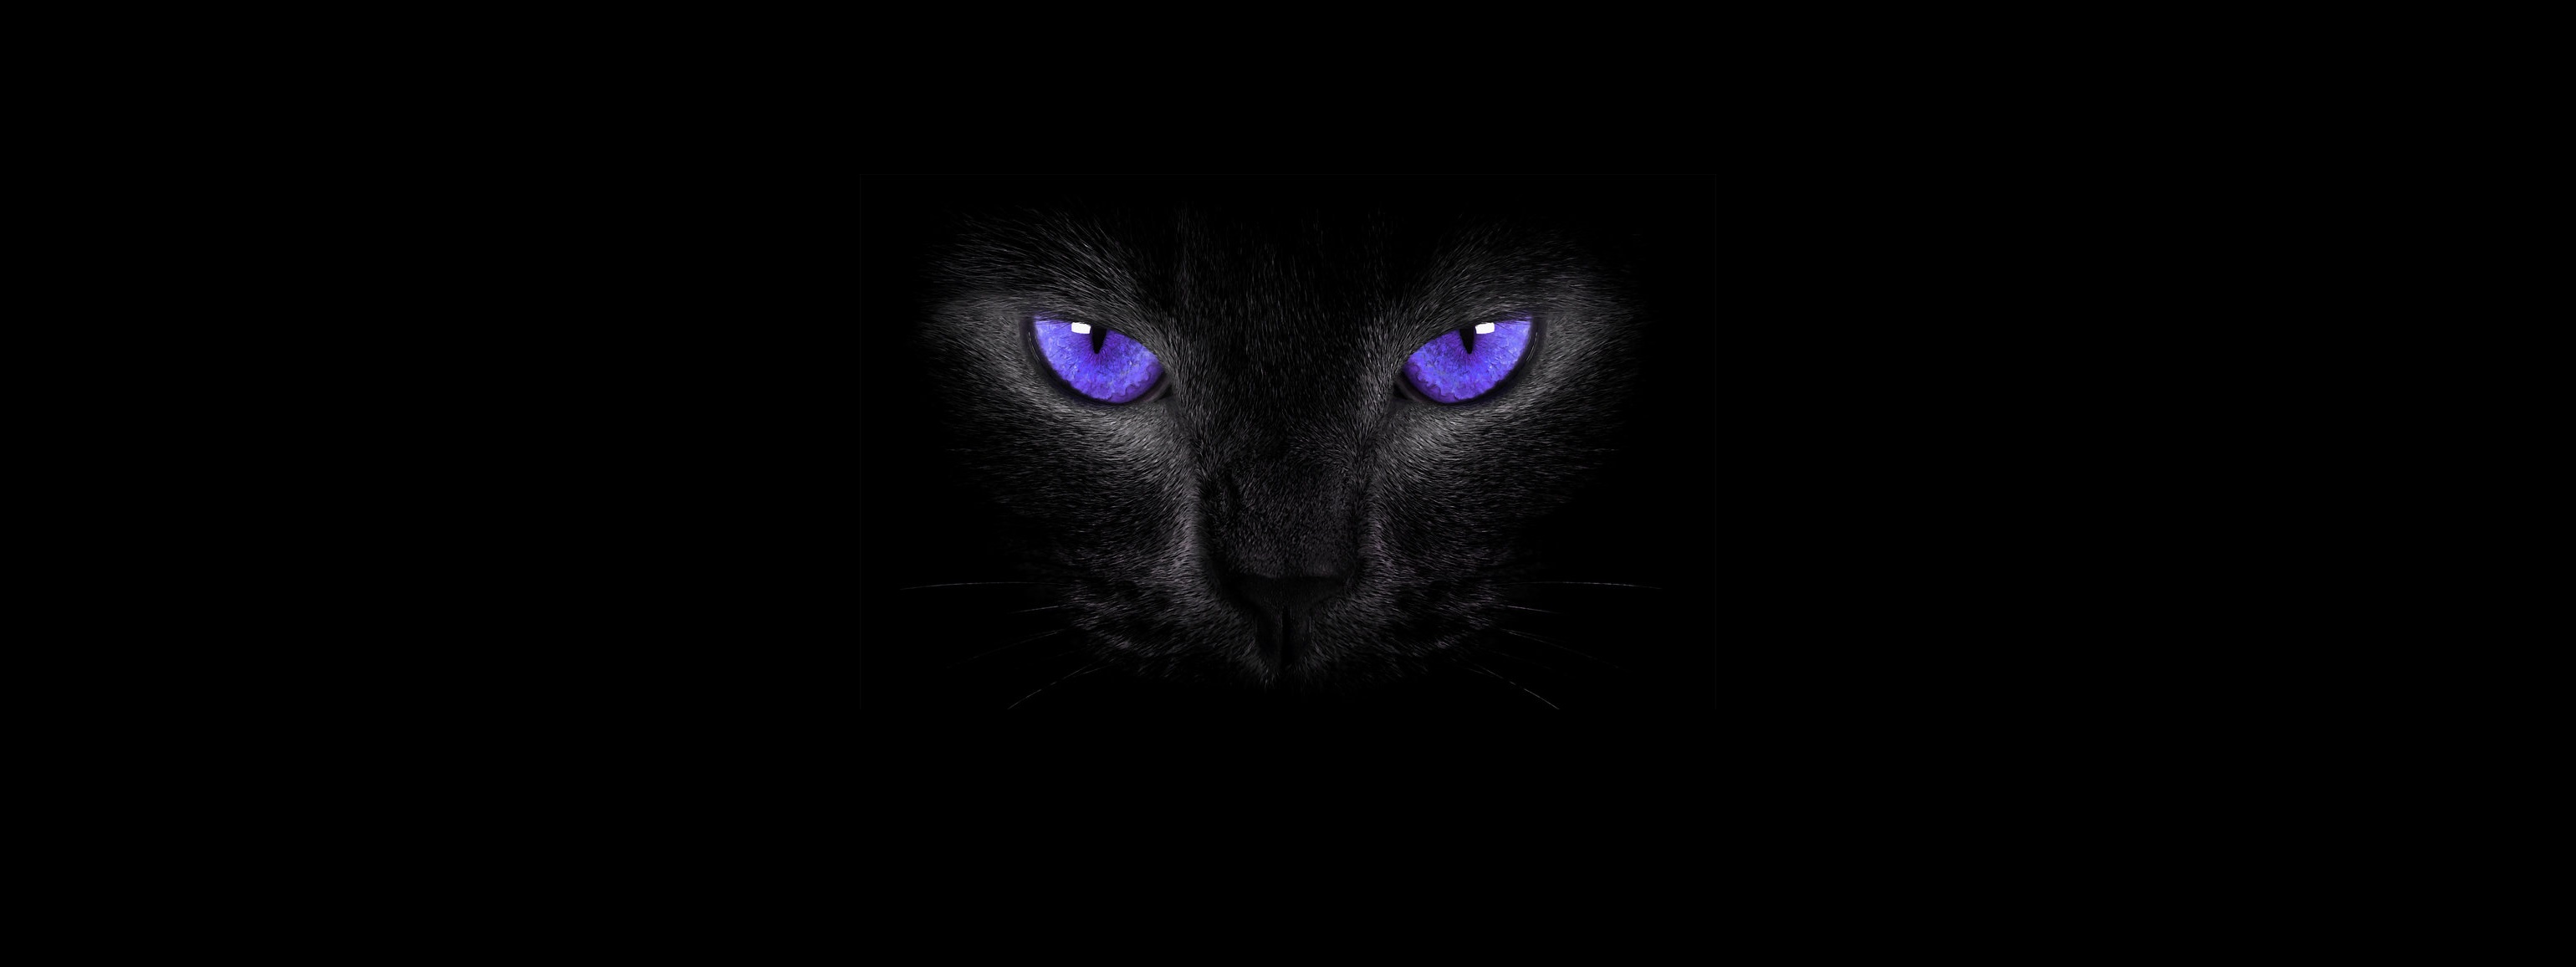 General 3080x1156 cat eyes simple background cats black cats smoky eyes